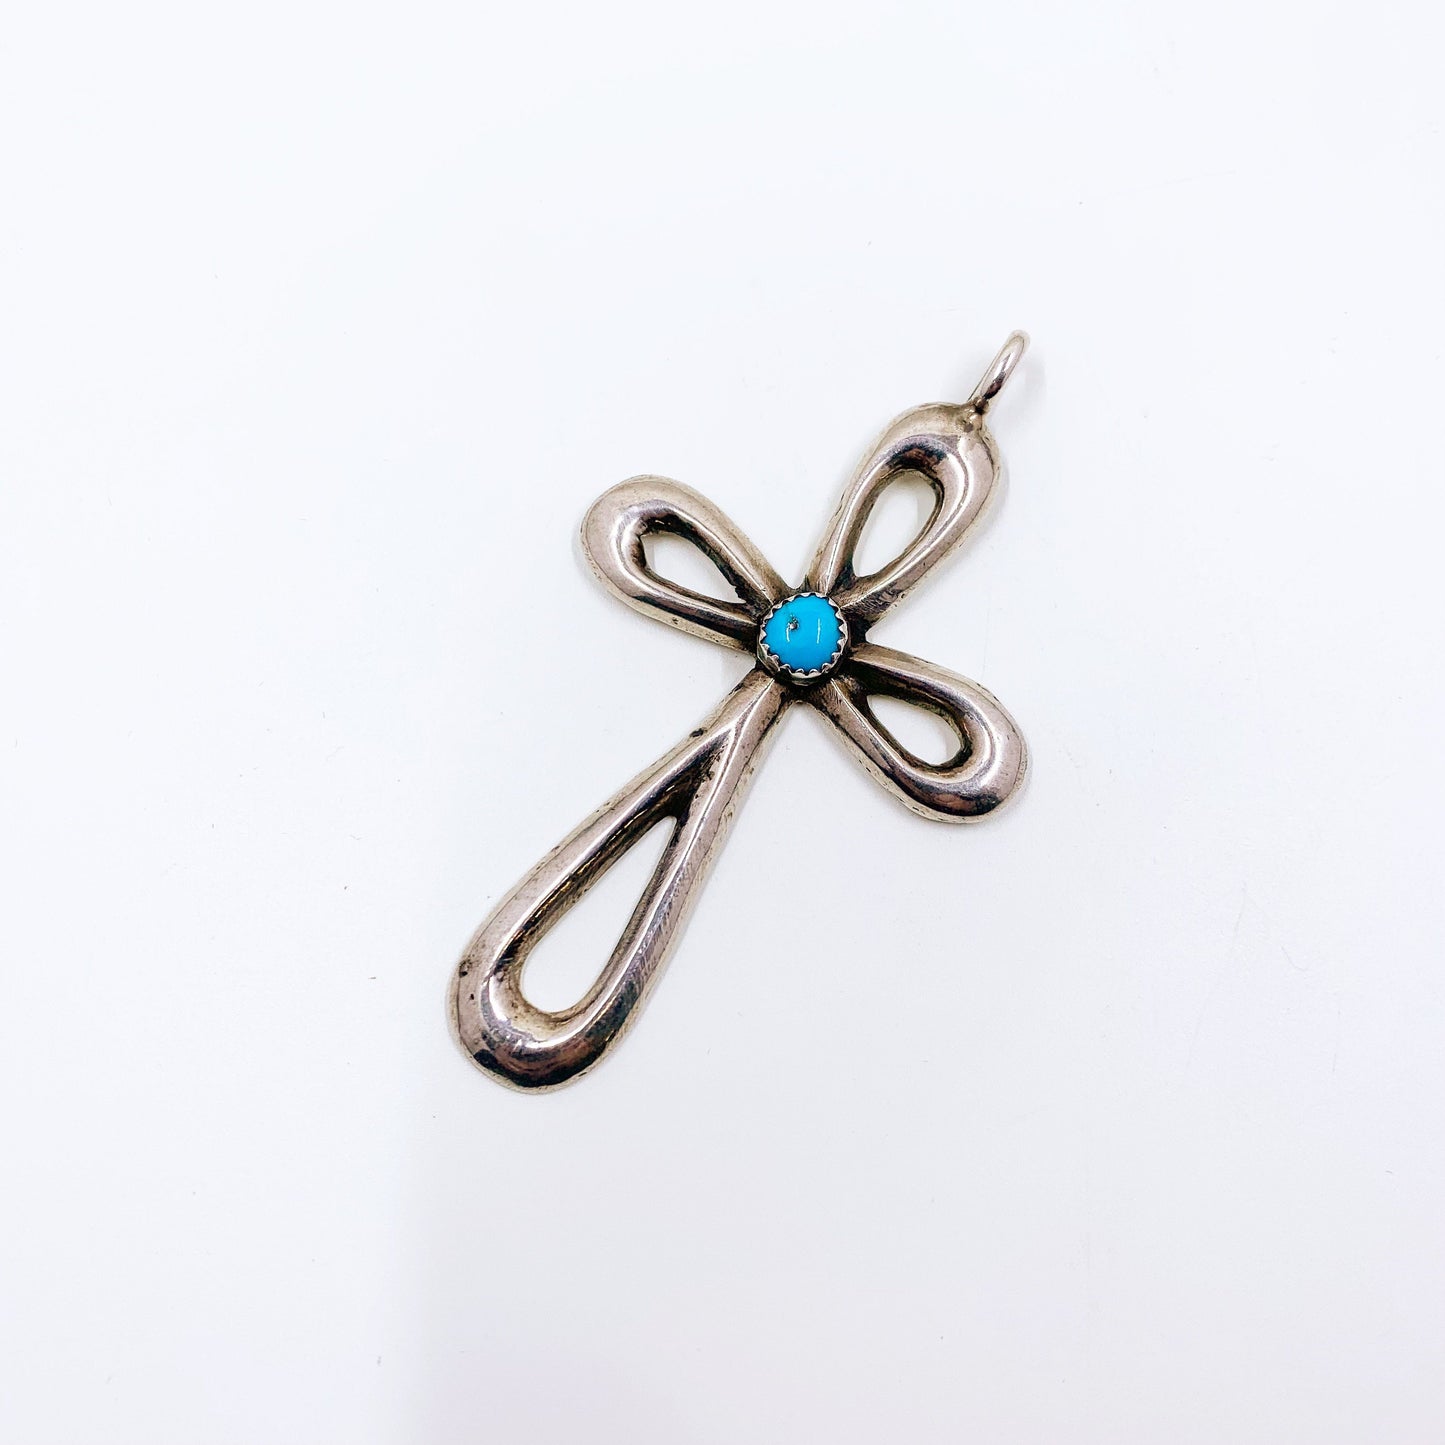 Vintage Sterling Sandcast Turquoise Cross Pendant | Southwest Turquoise Jewelry